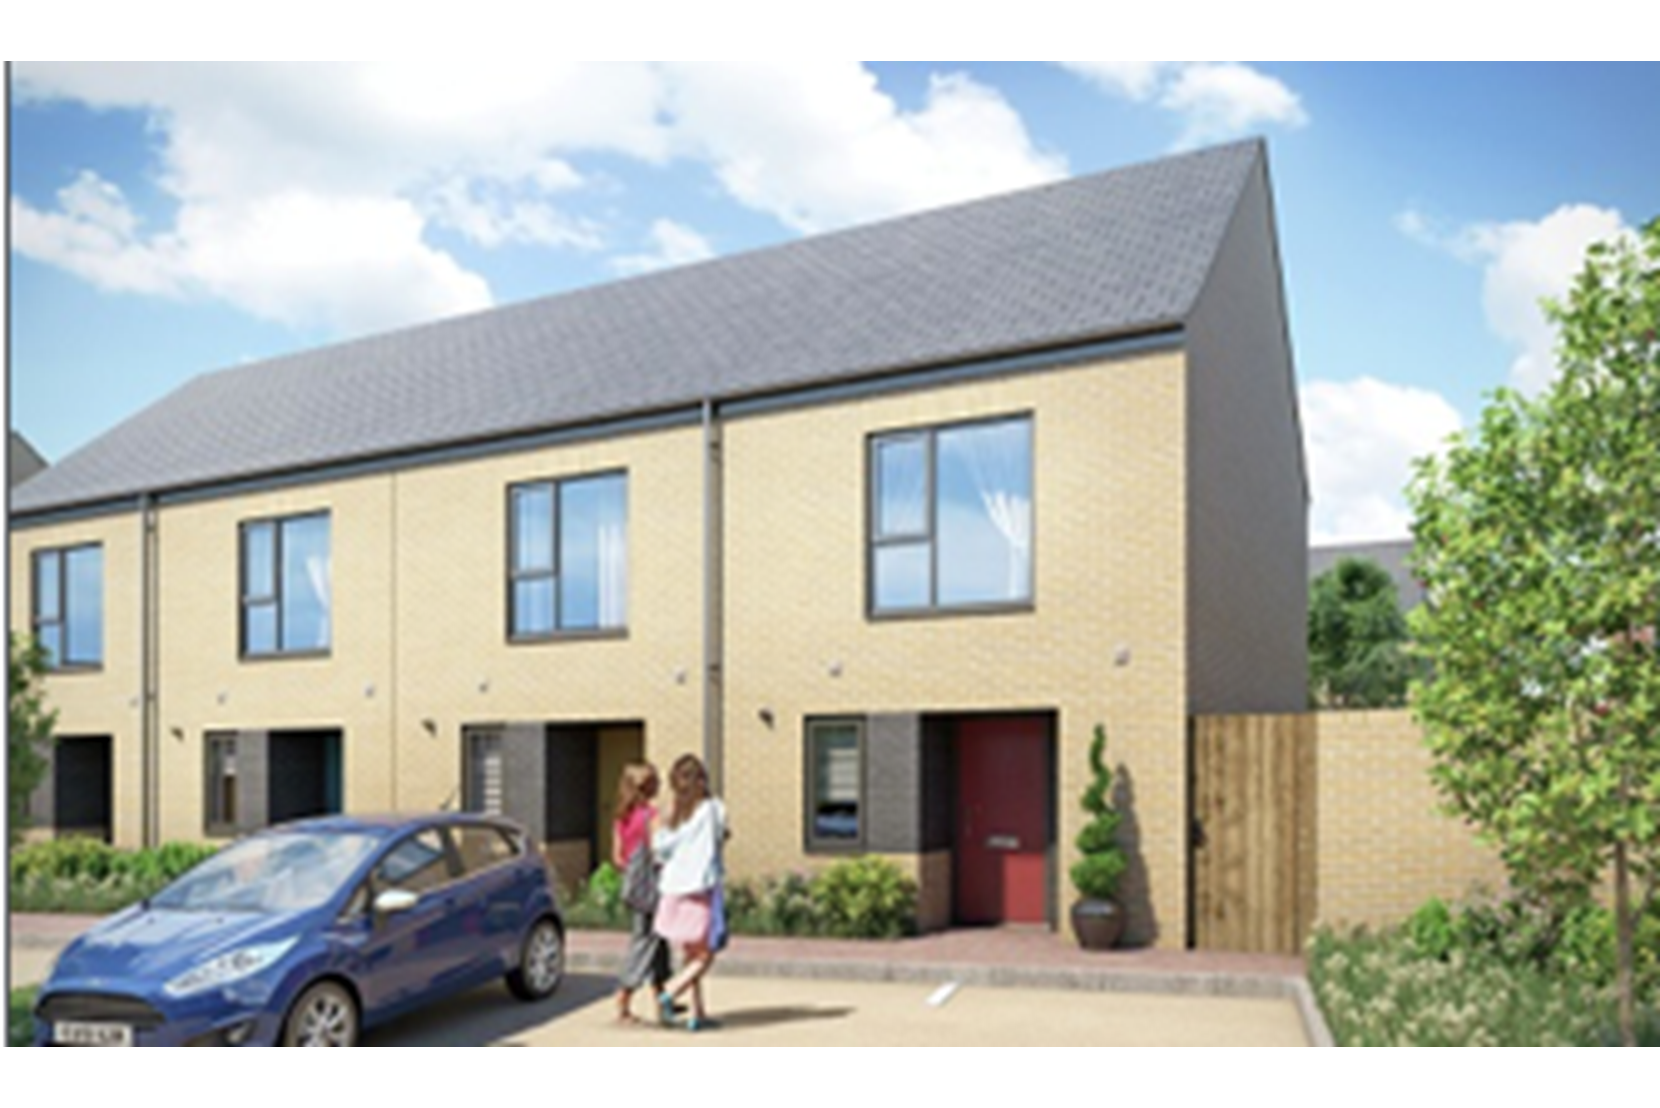 Houses to Rent by Simple Life at Base at Newhall, Harlow, CM17, development panoramic